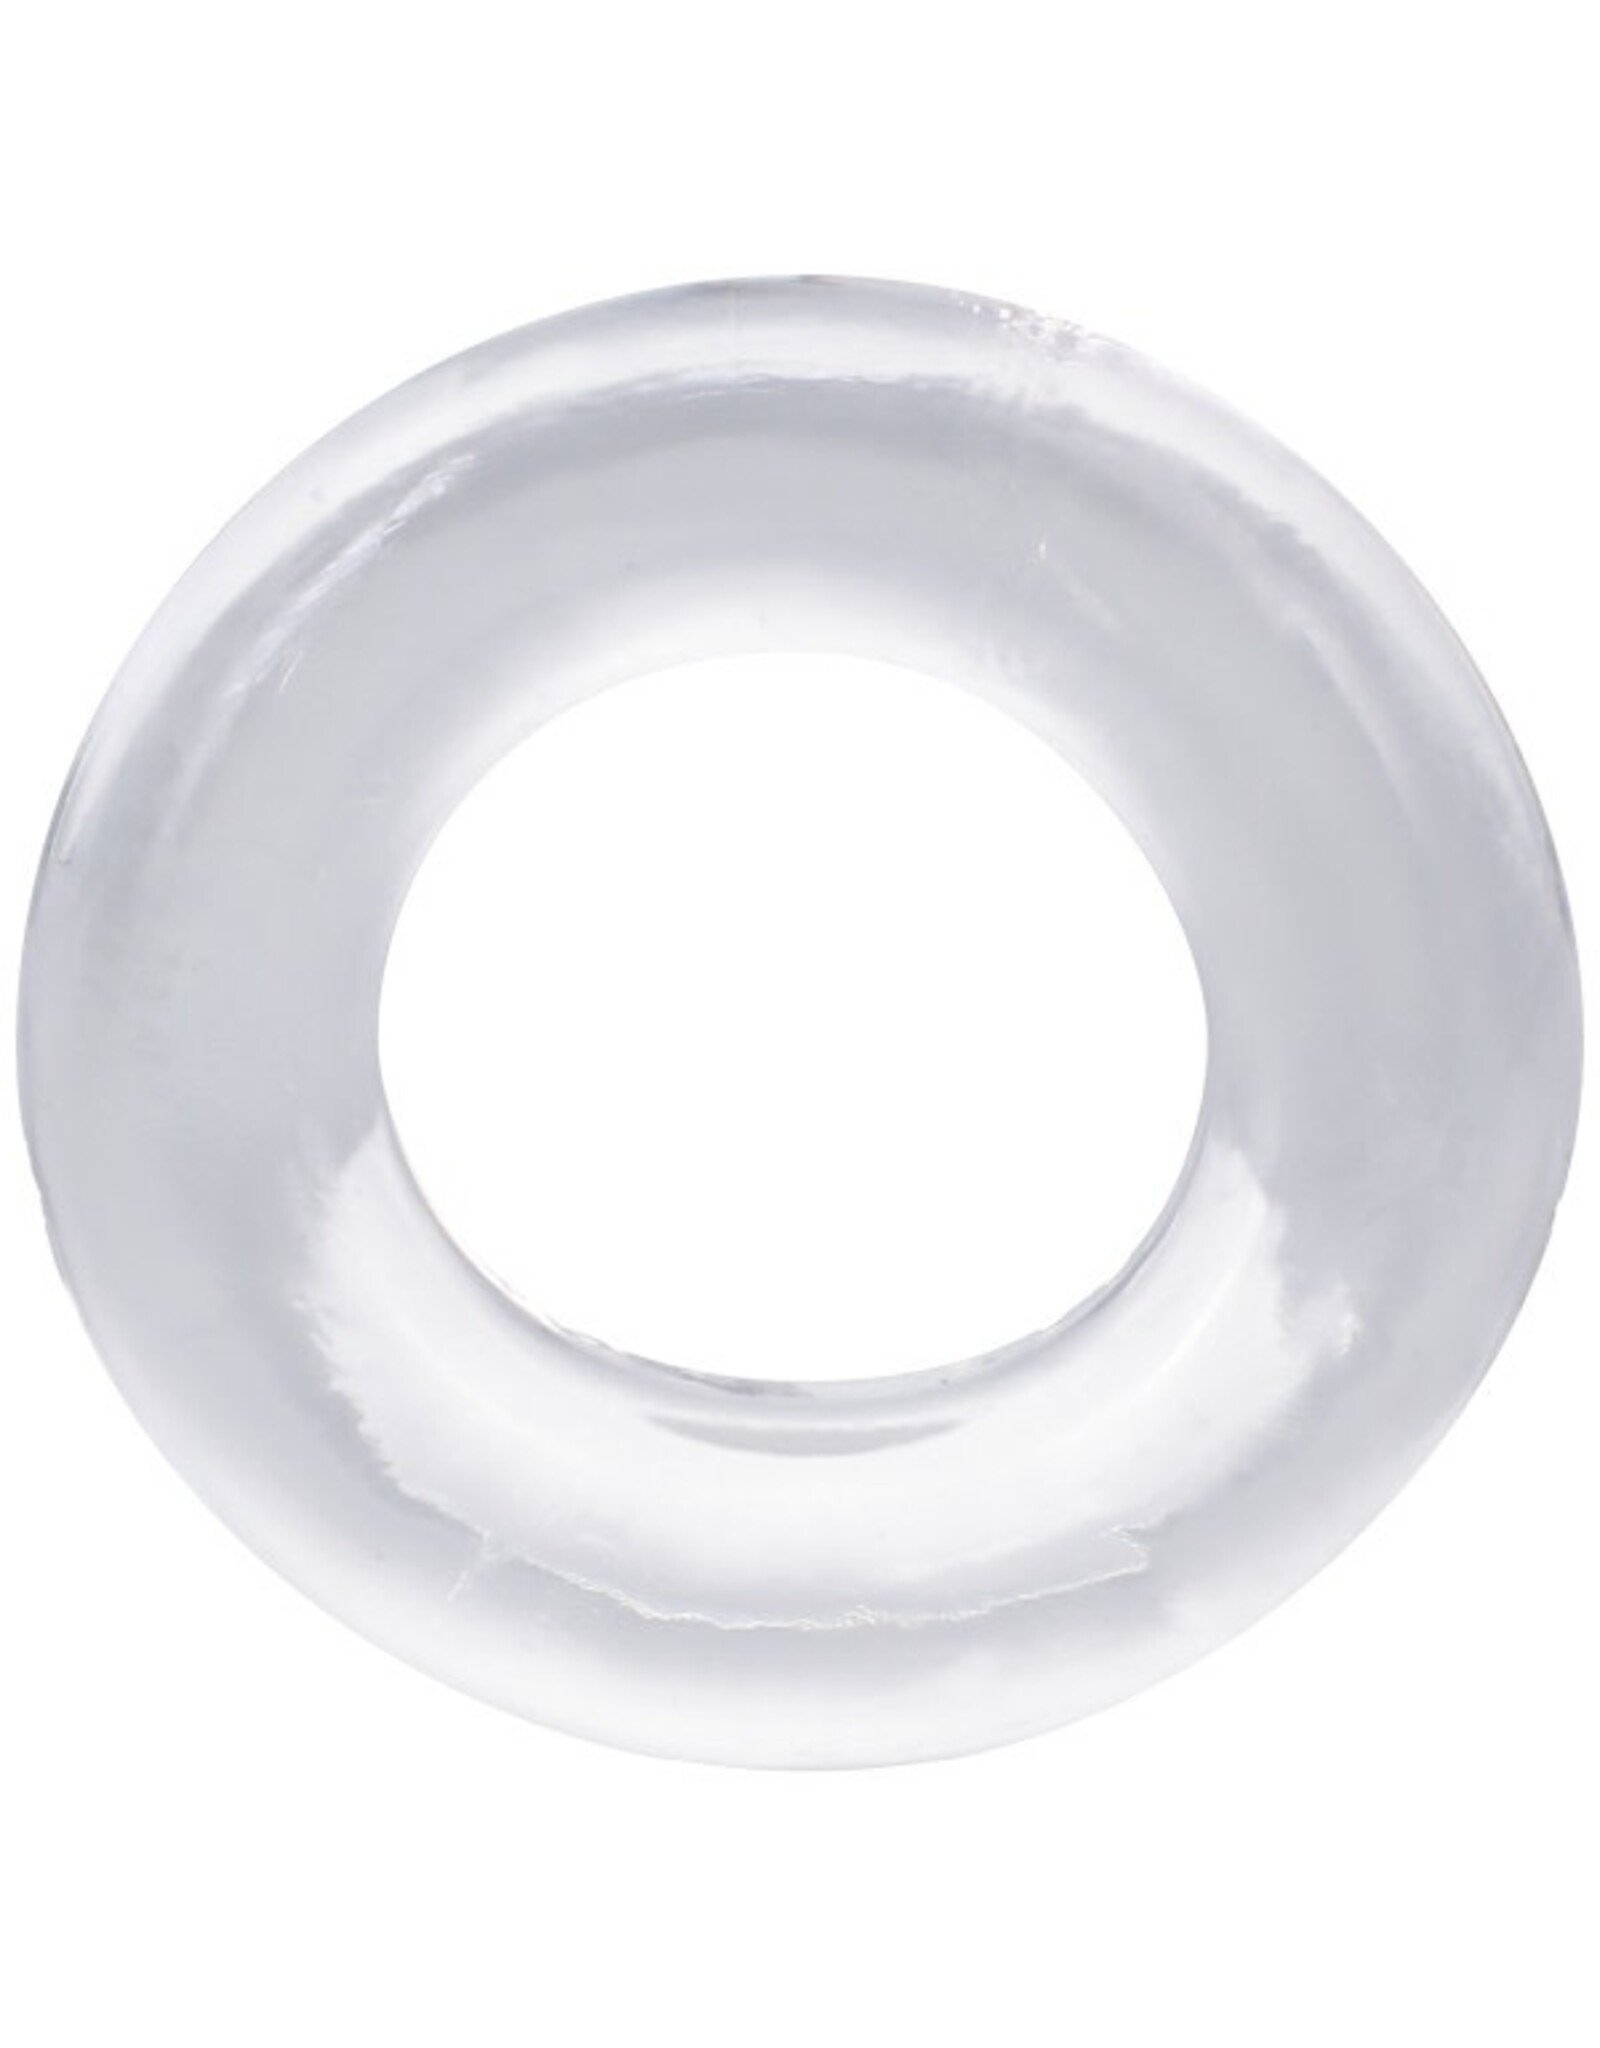 Doc Johnson Rock Solid - The Donut 4x - Clear